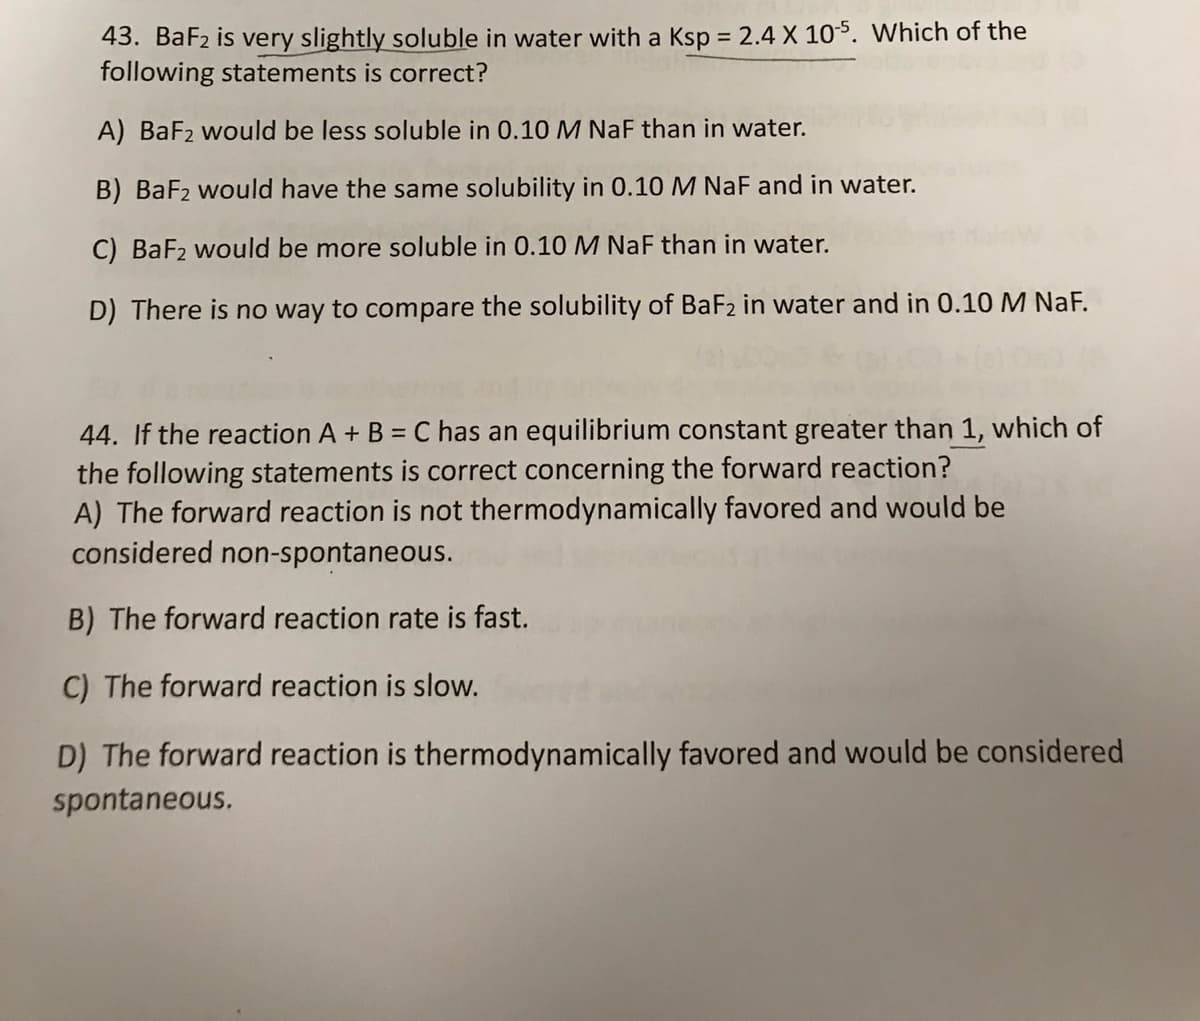 43. BaF2 is very slightly soluble in water with a Ksp = 2.4 X 105. Which of the
following statements is correct?
%3D
A) BaF2 would be less soluble in 0.10M NaF than in water.
B) BaF2 would have the same solubility in 0.10 M NaF and in water.
C) BaF2 would be more soluble in 0.10 M NaF than in water.
D) There is no way to compare the solubility of BaF2 in water and in 0.10 M NaF.
44. If the reaction A + B = C has an equilibrium constant greater than 1, which of
the following statements is correct concerning the forward reaction?
A) The forward reaction is not thermodynamically favored and would be
considered non-spontaneous.
B) The forward reaction rate is fast.
C) The forward reaction is slow.
D) The forward reaction is thermodynamically favored and would be considered
spontaneous.
